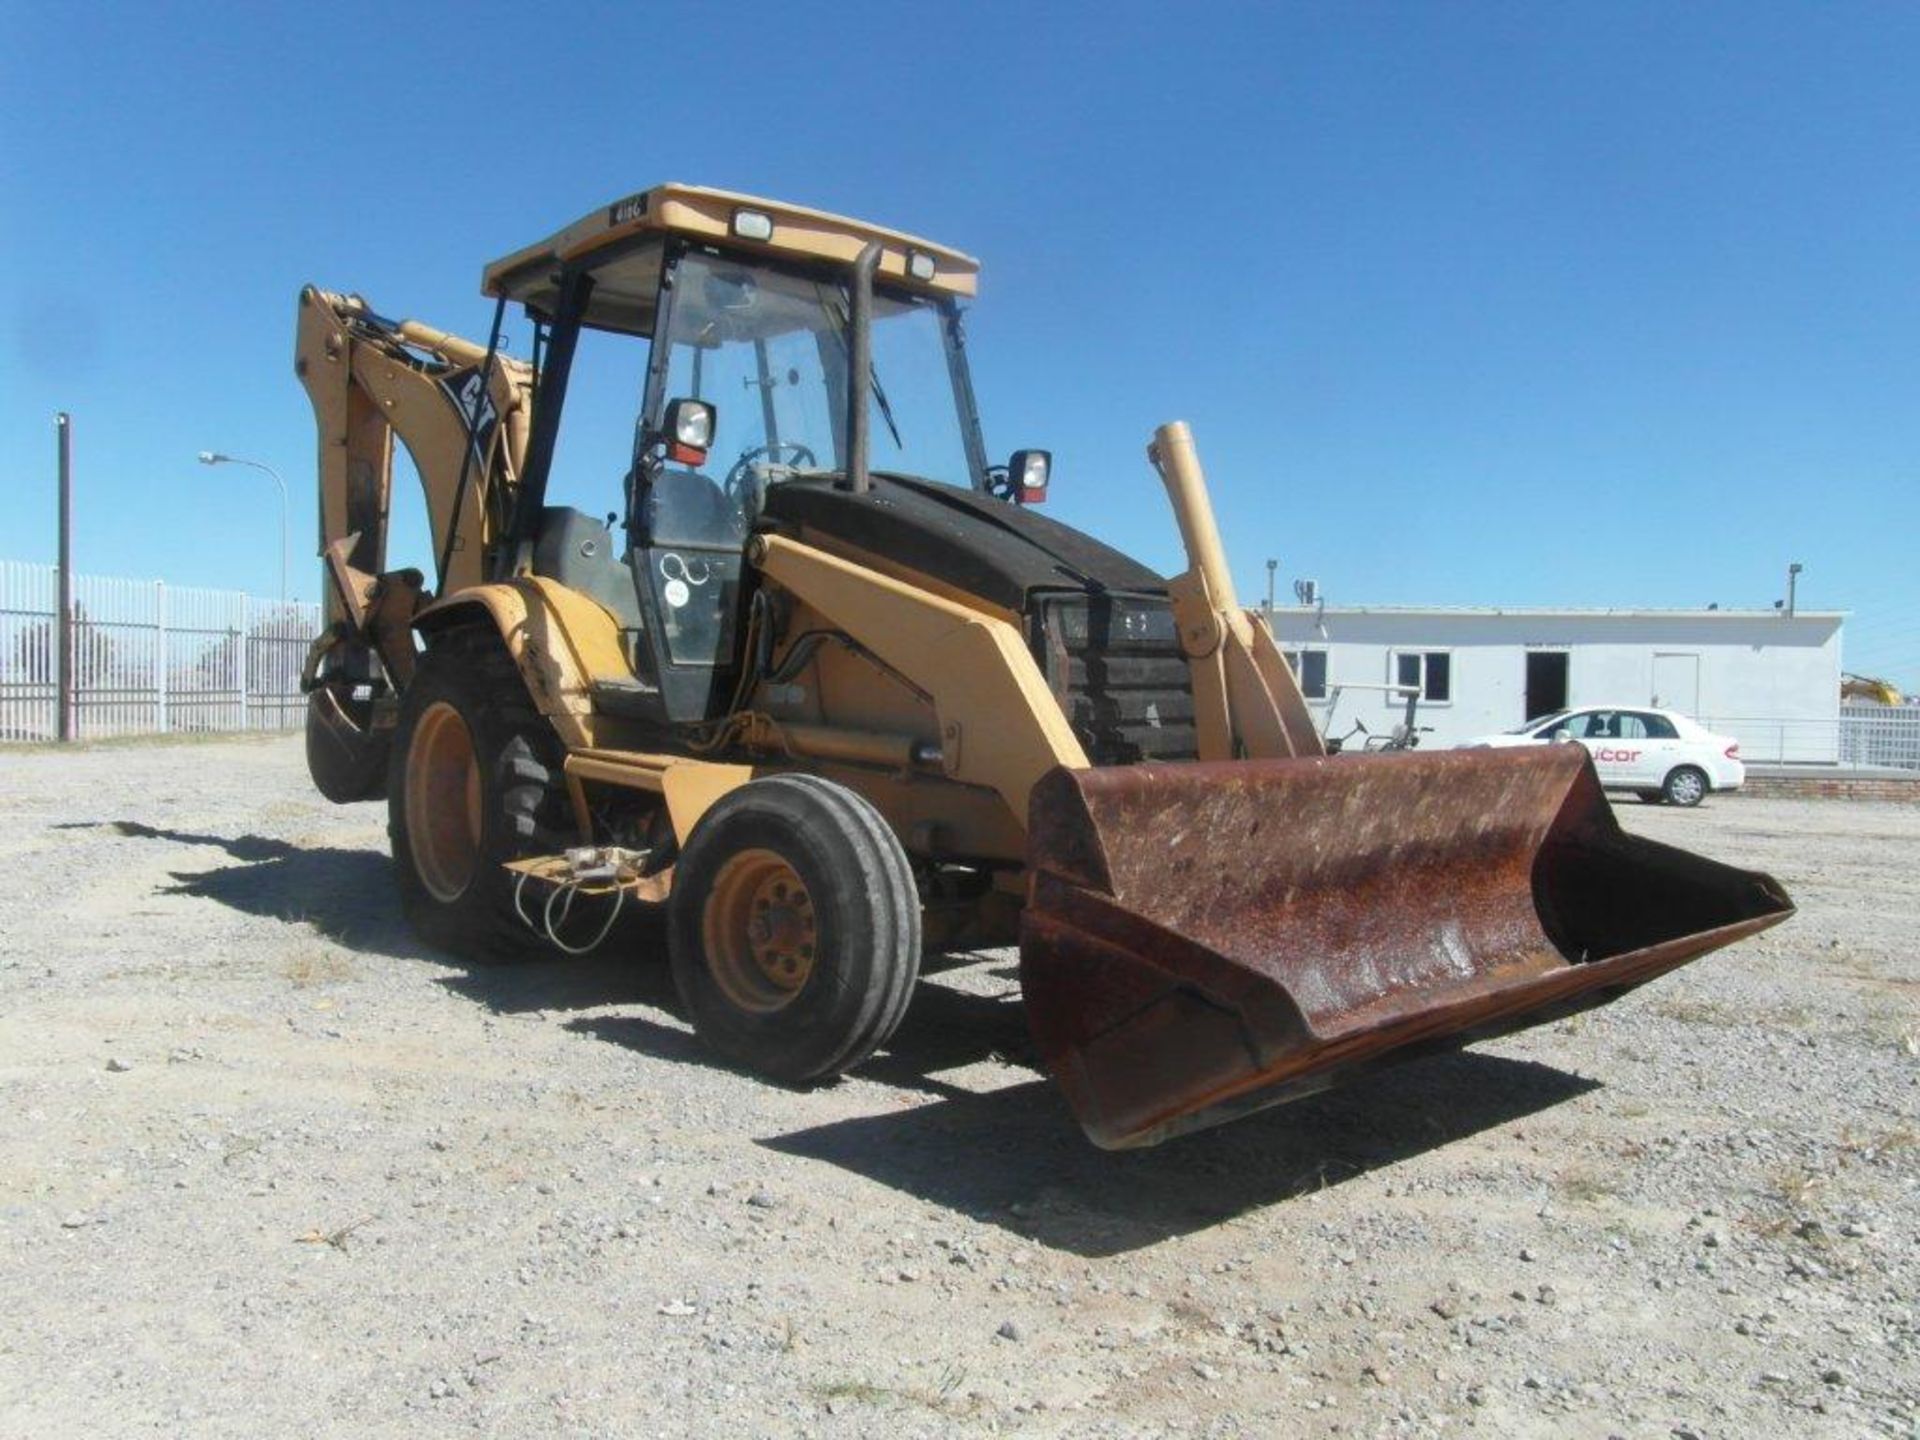 1998 FMD103MP Caterpillar 416C TLB (Vin No:5YN02702)(11132 hrs ) - Image 2 of 4